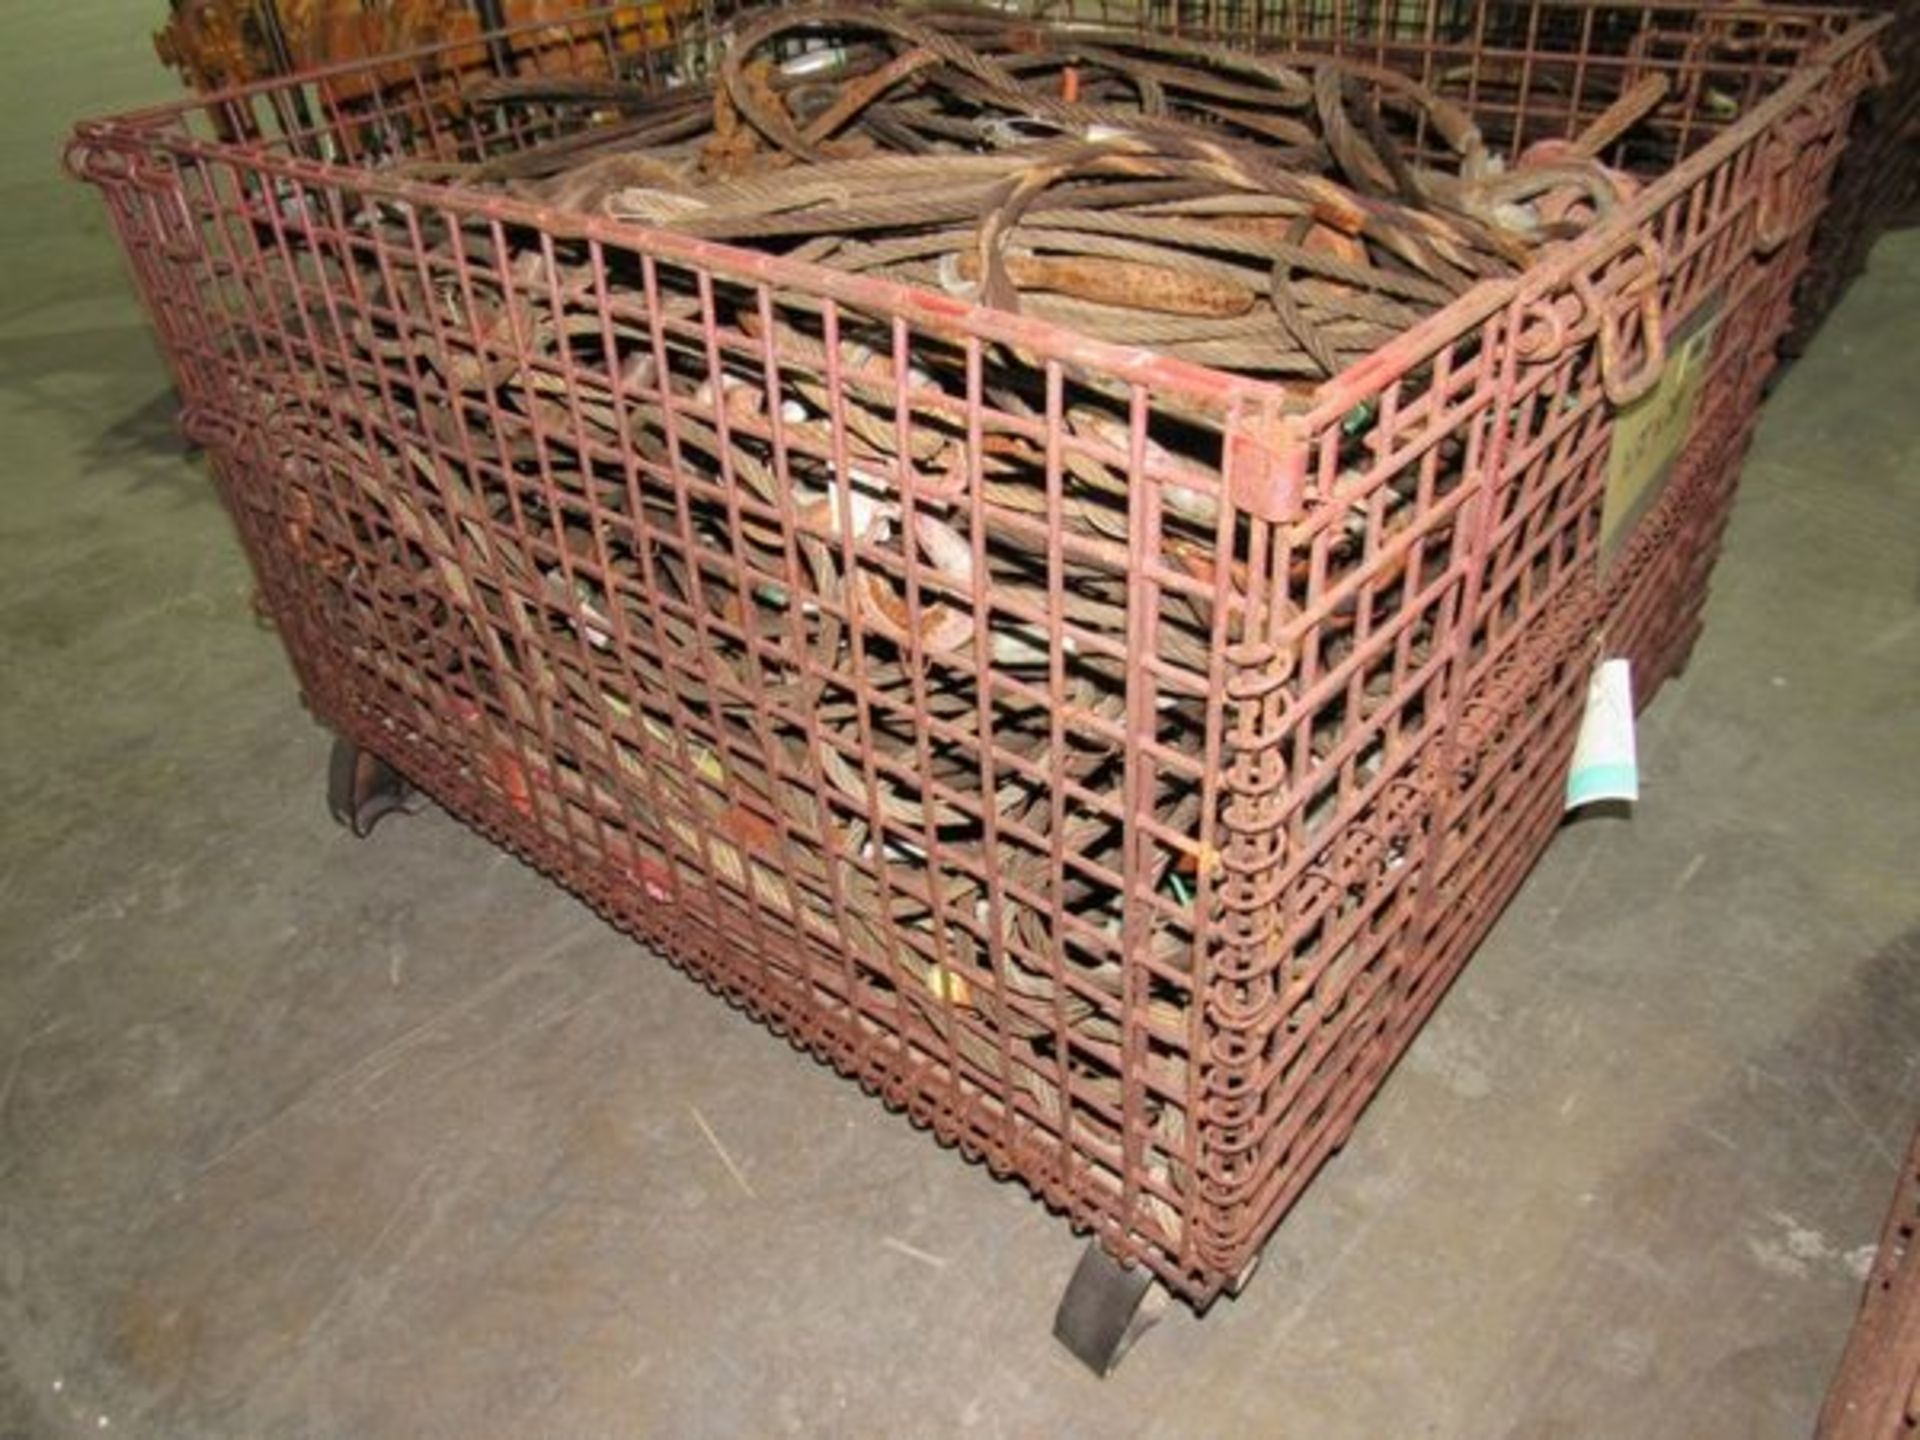 Warehouse Basket- MFR - Unknown 48" x 40" x 31" **Contents SOLD Separately in Lot#1209** - Image 3 of 7